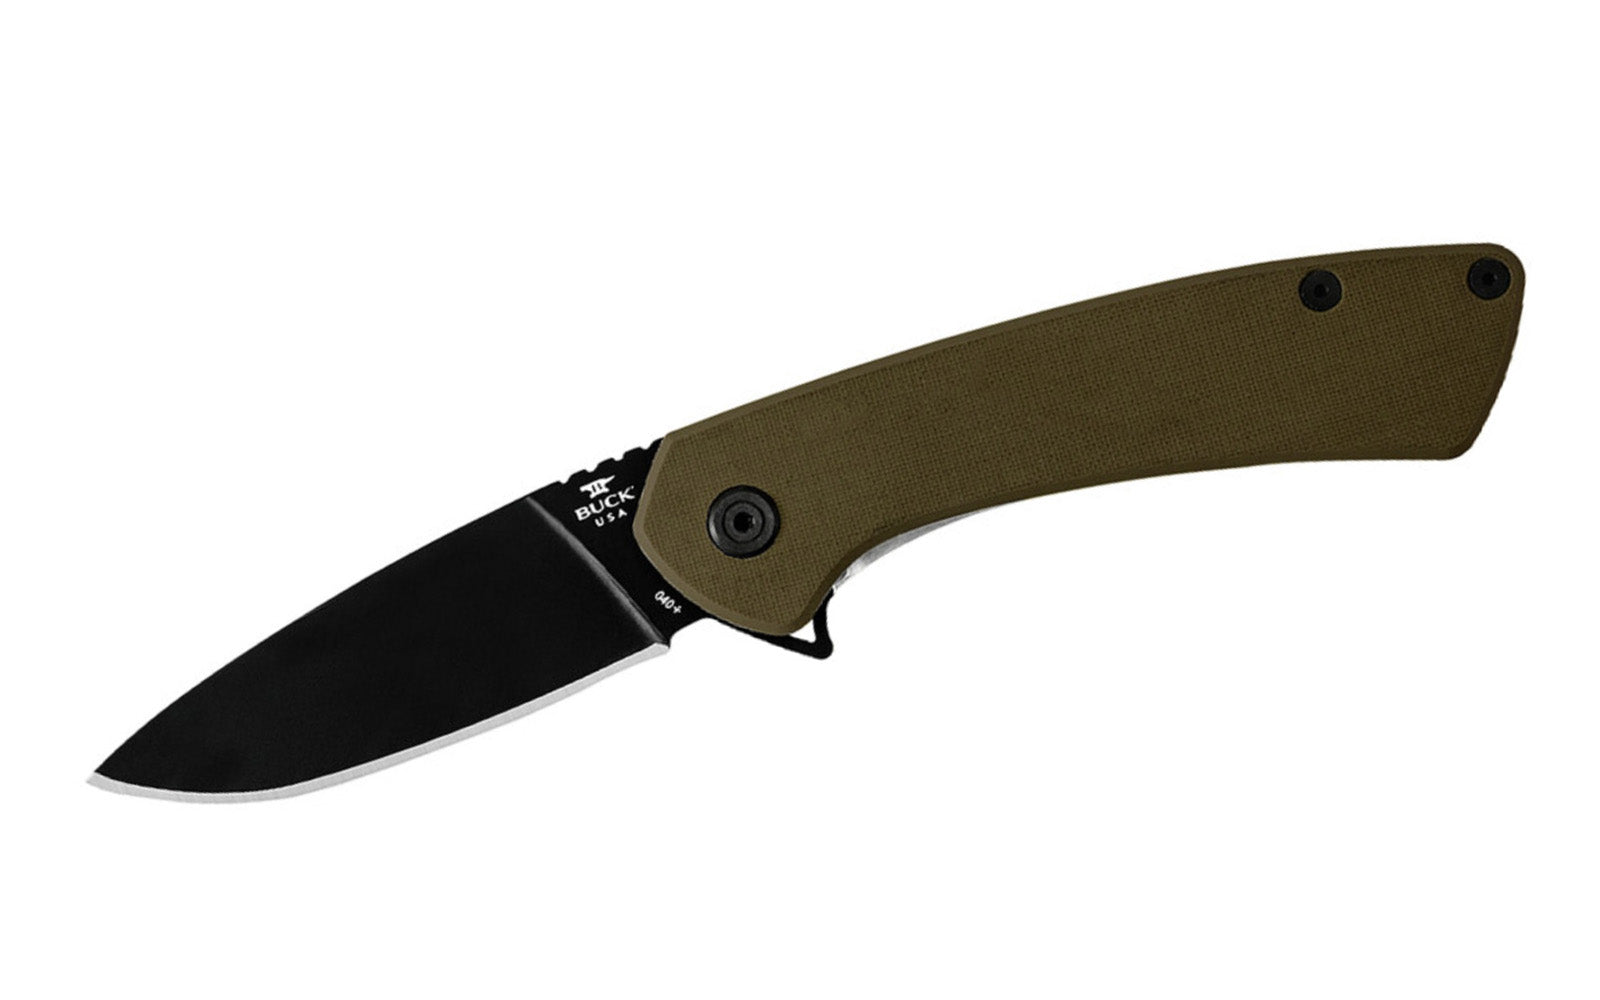 The Buck Knives 040 Onset Folding Knife has a blade made of S45VN Steel with Cerakote coating & an olive drab (OD Green) G10 handle. Frame lock pocket knife provides security & strength. Ball bearings & a blade flipper ensure smooth, one-hand opening. Pocket clip attached to knife. Made in USA. Model 0040GRS-B